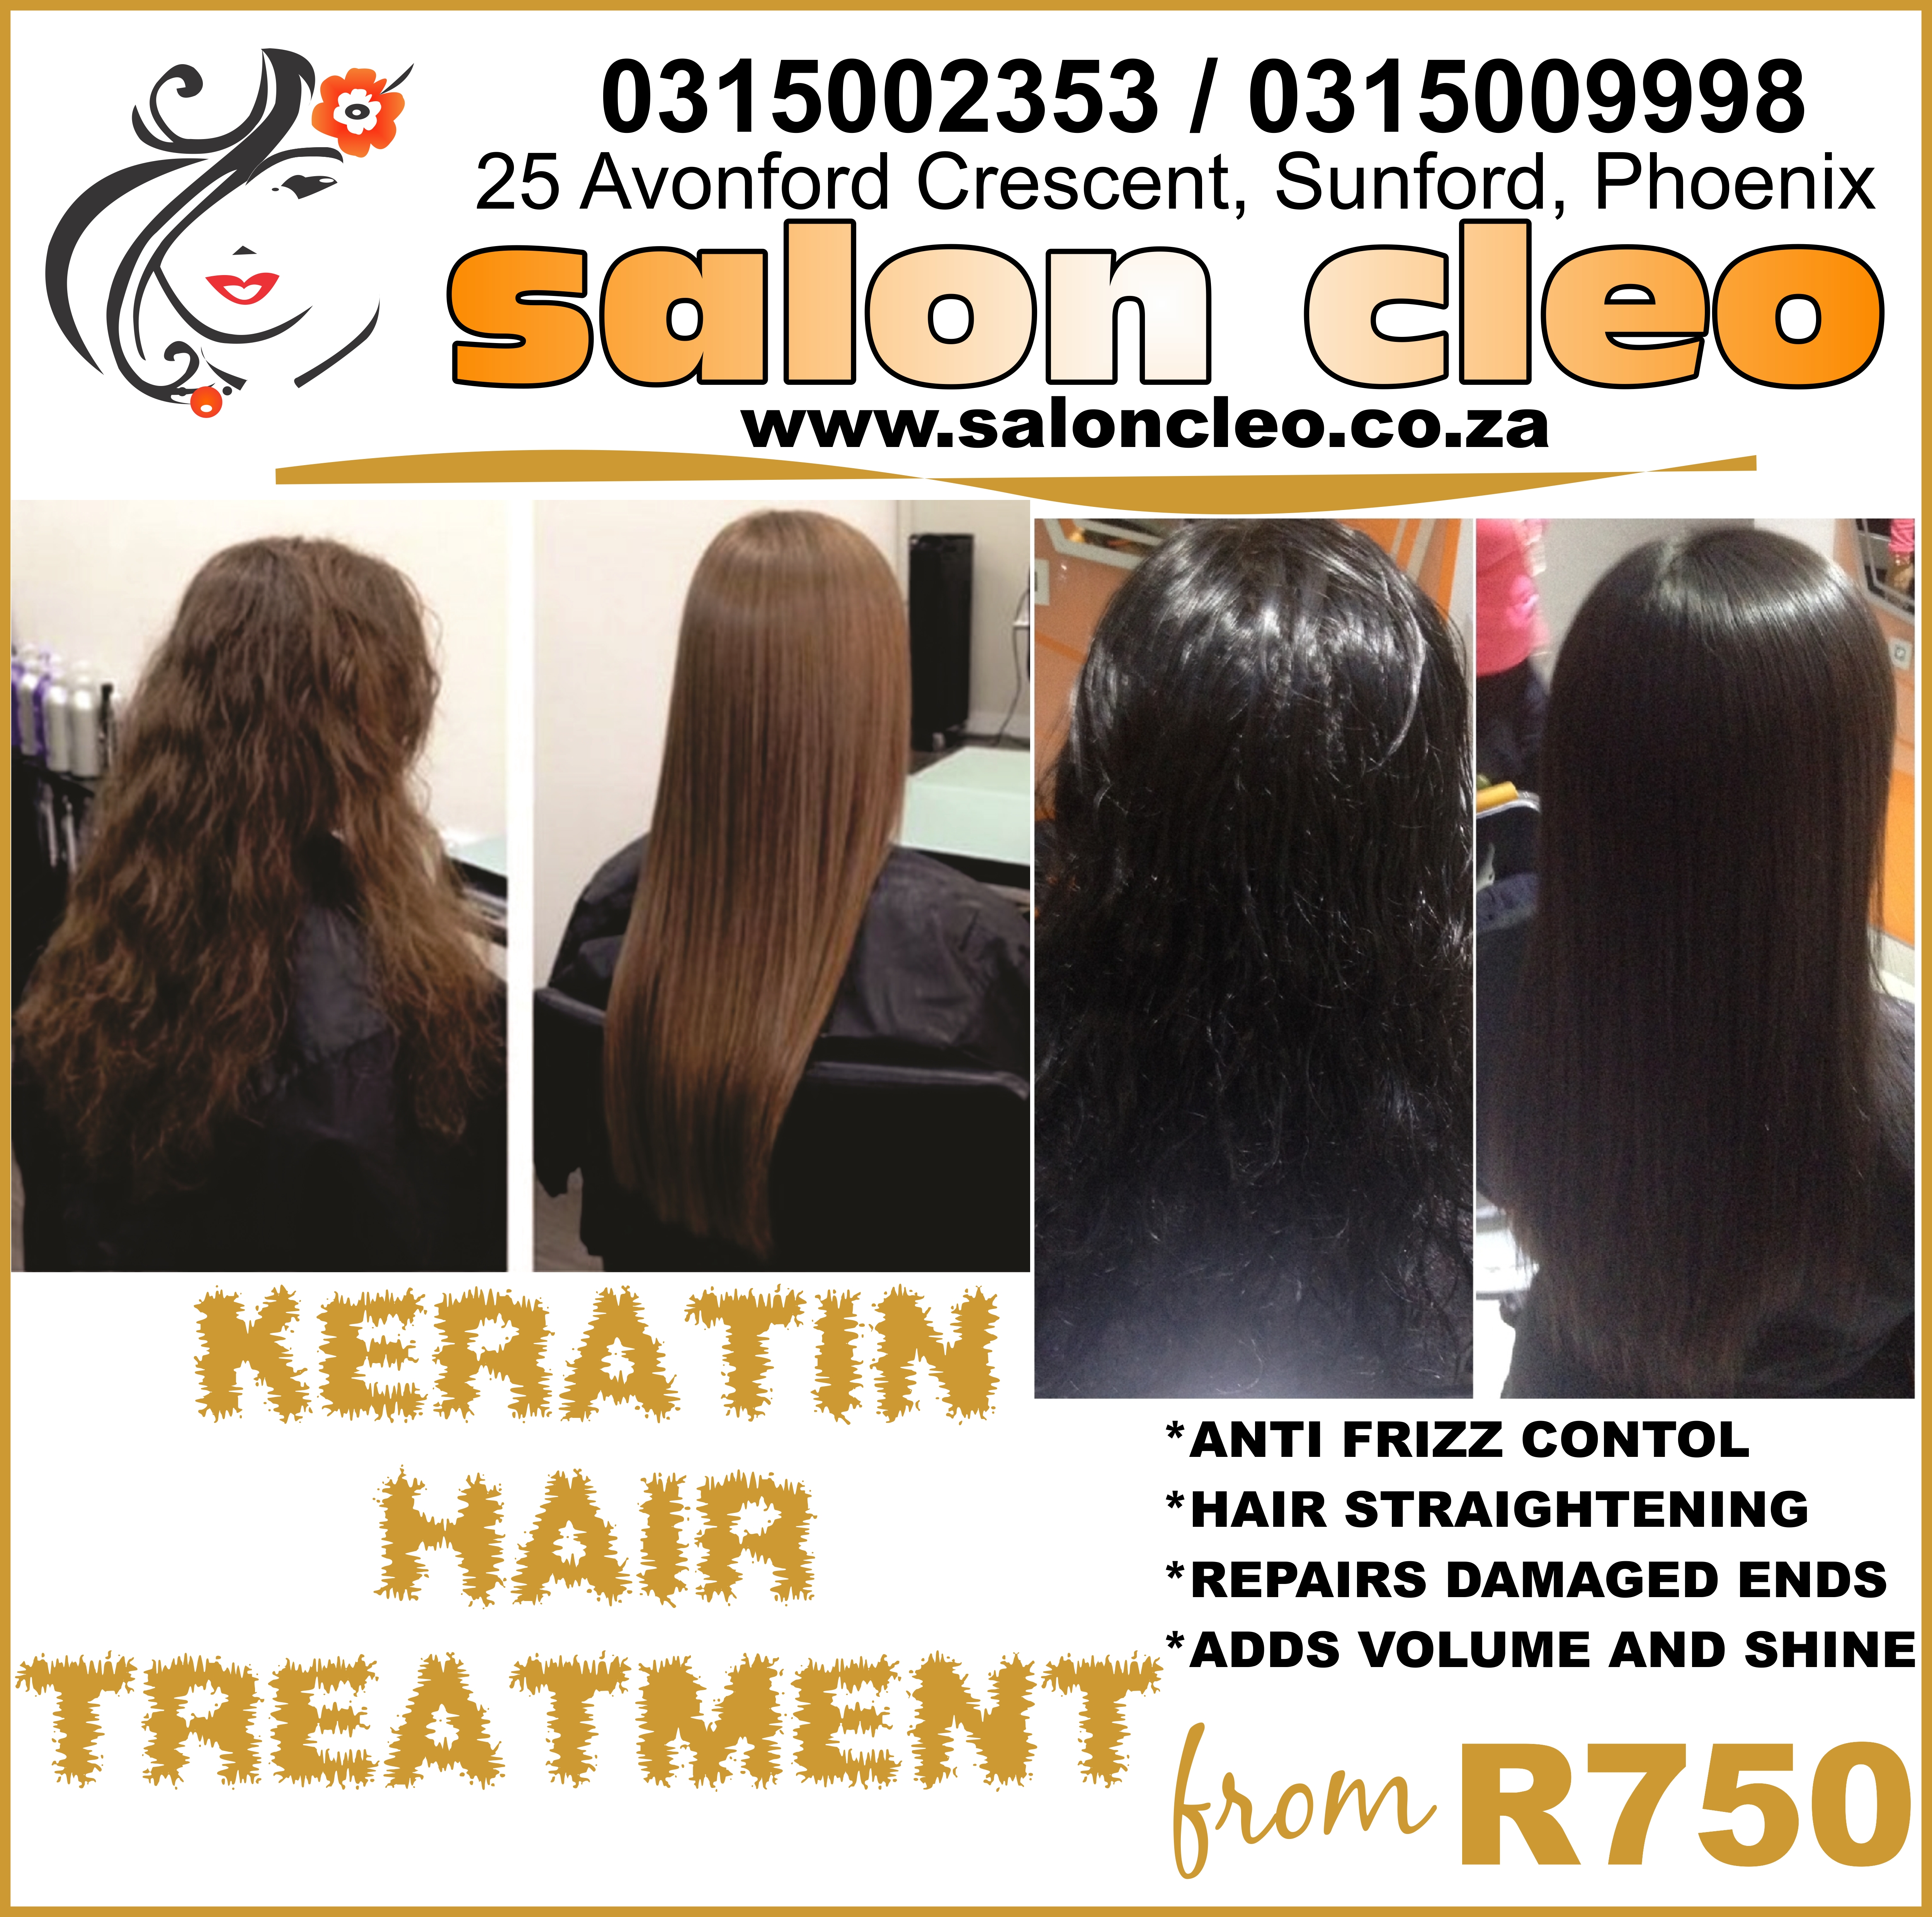   THE NEW KERATIN TREATMENT NOW AVAILABLE @ SALON CLEO. THIS IS AN AMAZING FRIZZ CONTROL TREATMENT AND CORRECTS AND REPAIRS BADLY DAMAGED HAIR ENDS.  THIS TREATMENT WILL GIVE YOU 3 TO 4 MONTHS OF BEAUTIFULLY STRAIGHT HAIR.   KERATIN TREATMENT - Farewell, Frizz: You can forget about FRIZZY hair after this Treatment   Keratin Revolution Nano - Intense treatment is a 3 in 1 treatment that uses NANO TECHNOLOGY.   *This treatment helps to Straighten , Smooth , Strengthen , Repair , Add Shine and Improve the manageability of the hair * Advance with the most effective formula to treat and tame unruly, rebel hair  *As well as providing thermal protection. It also provides an intense moisture boost , without weighing it down for hair that is full of vitality.  